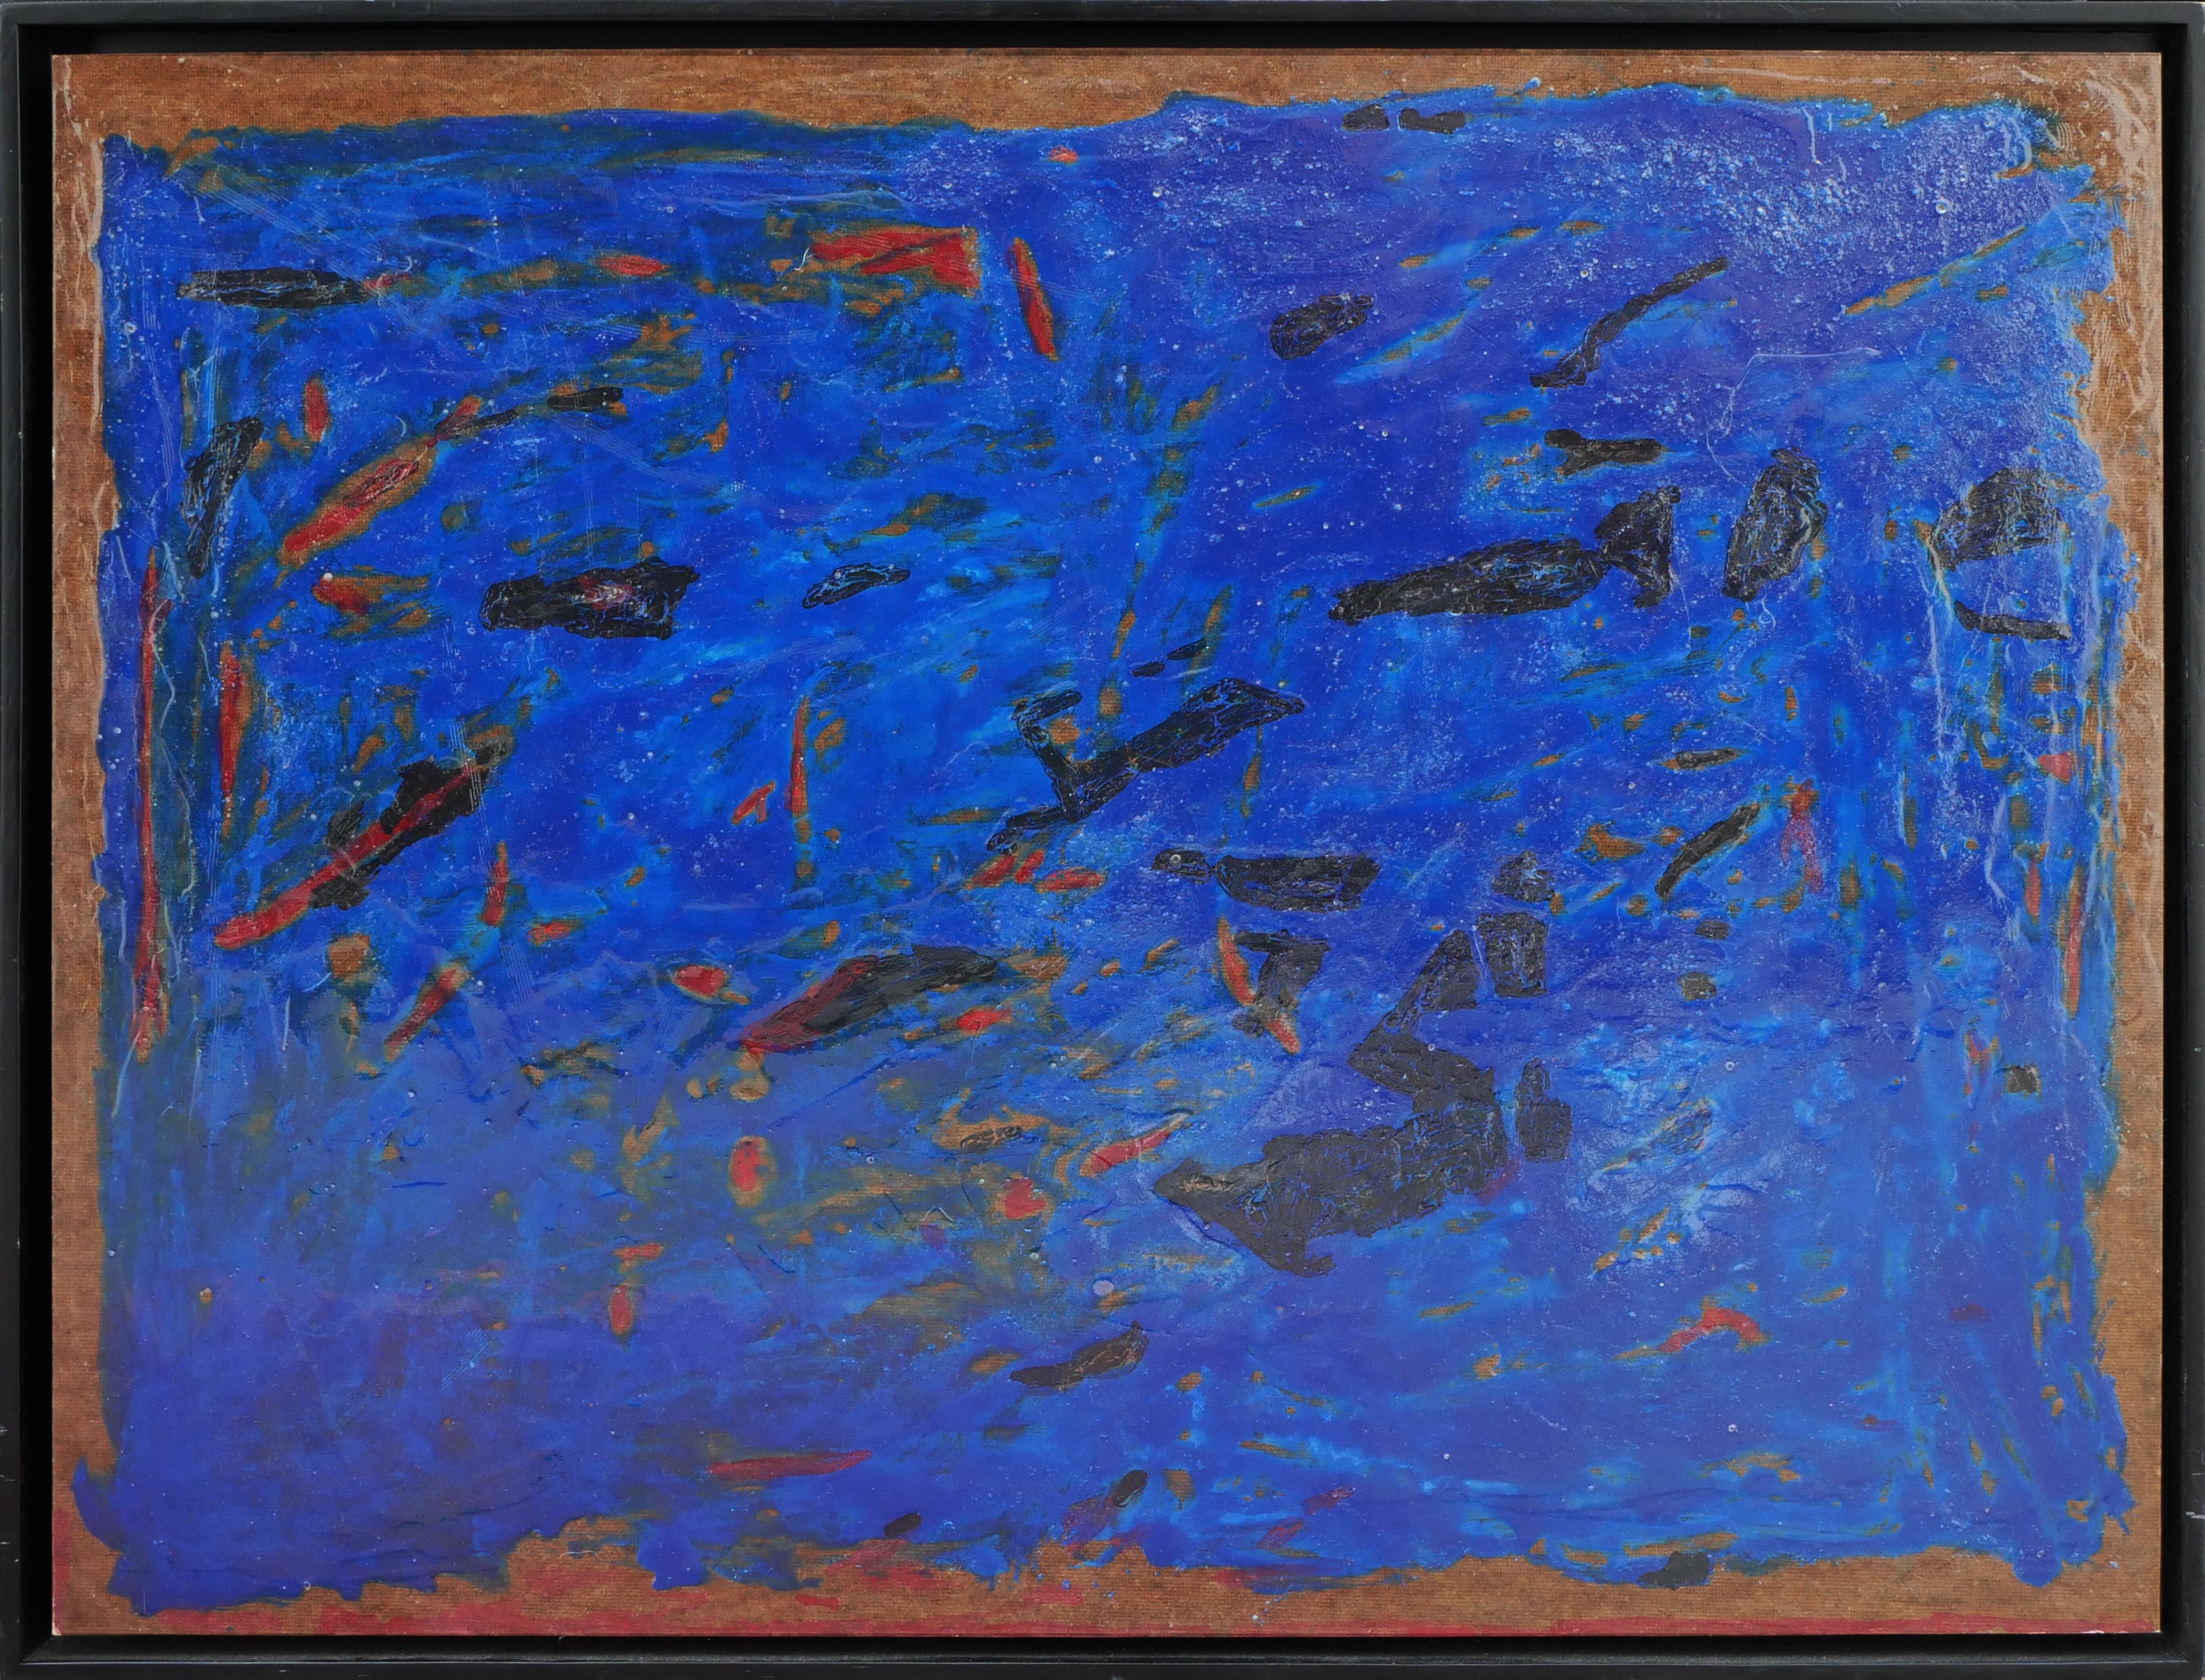 This work features a blue field with accents of gold and black reminiscent of fish in a pond. Framed in a black wooden frame. Signed, titled, and dated by the artist Paul Reeves.

Artist Biography: Paul Reeves is the former owner of Reeves Antiques.